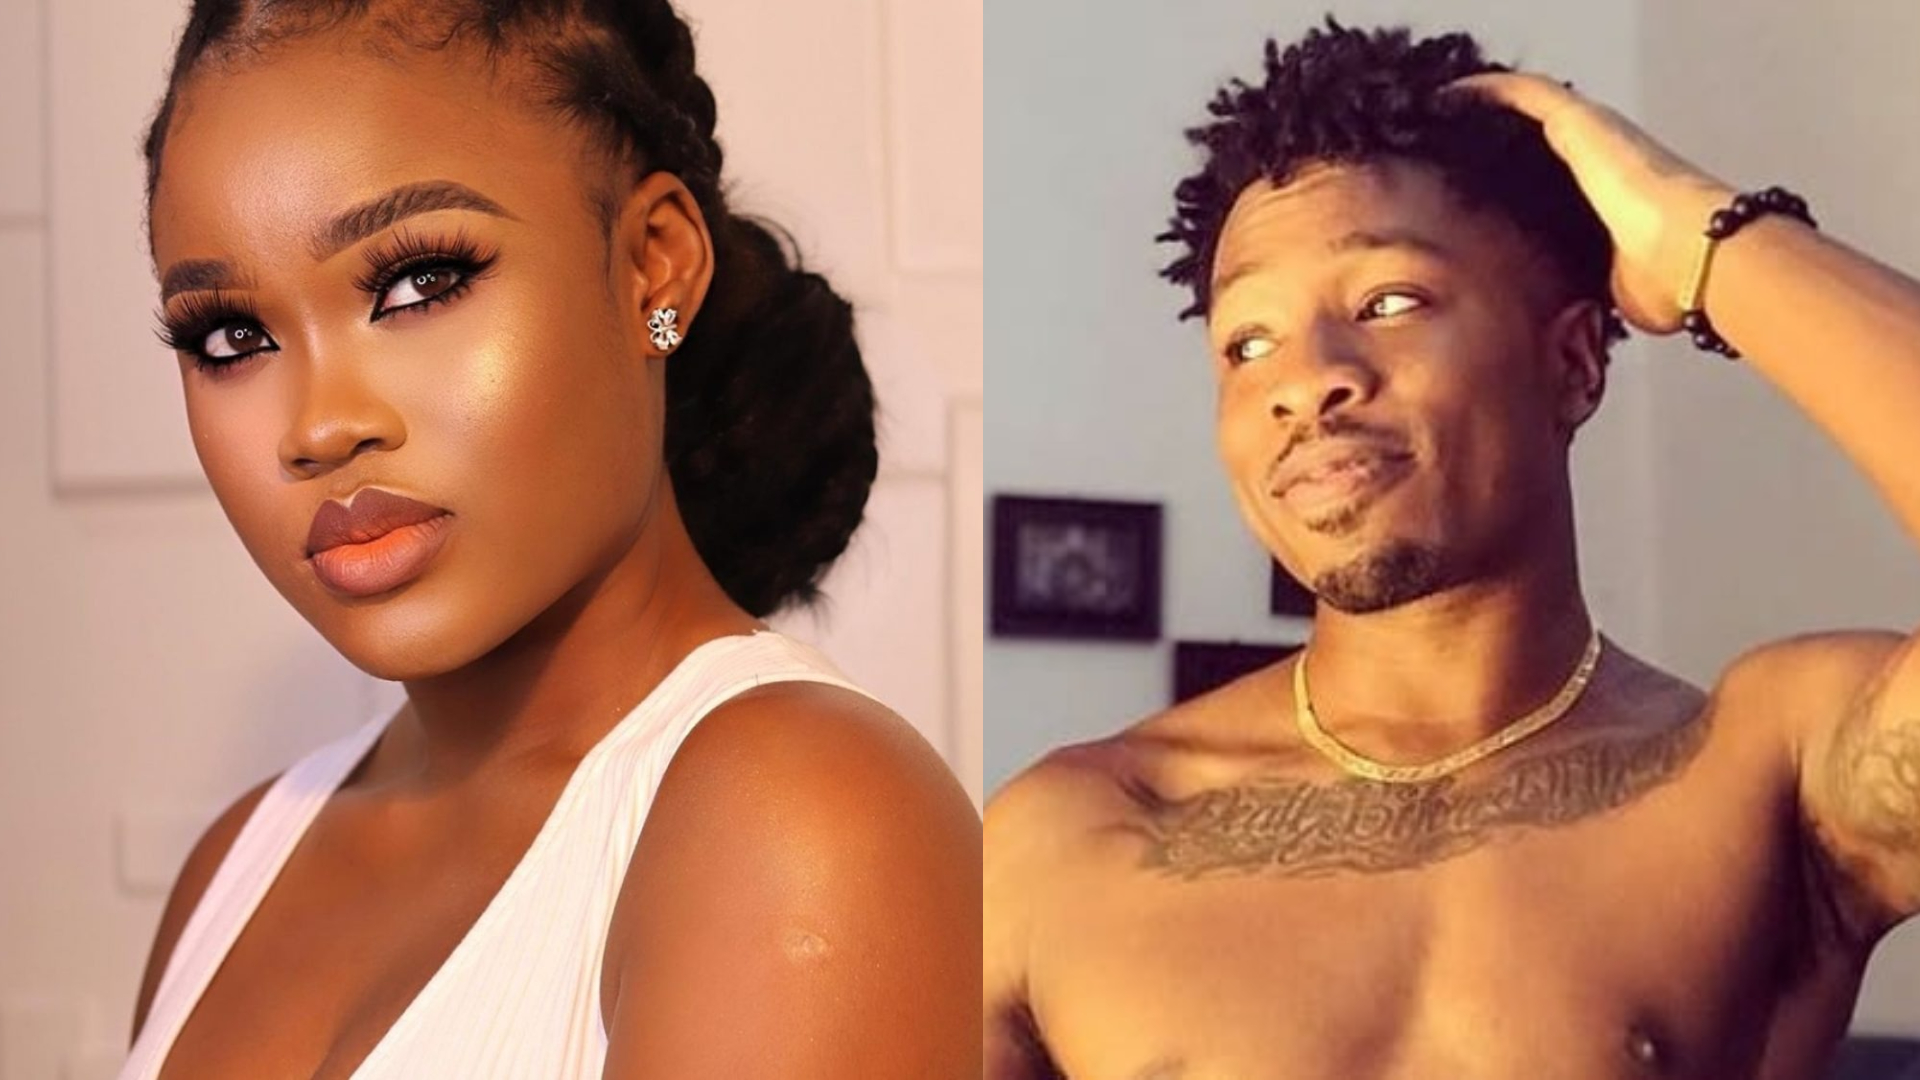 Ike's sexual advance towards his female colleague, Cee-C was rejected, just hours after he had stated his plot to gain her trust and make her fall in love with him.